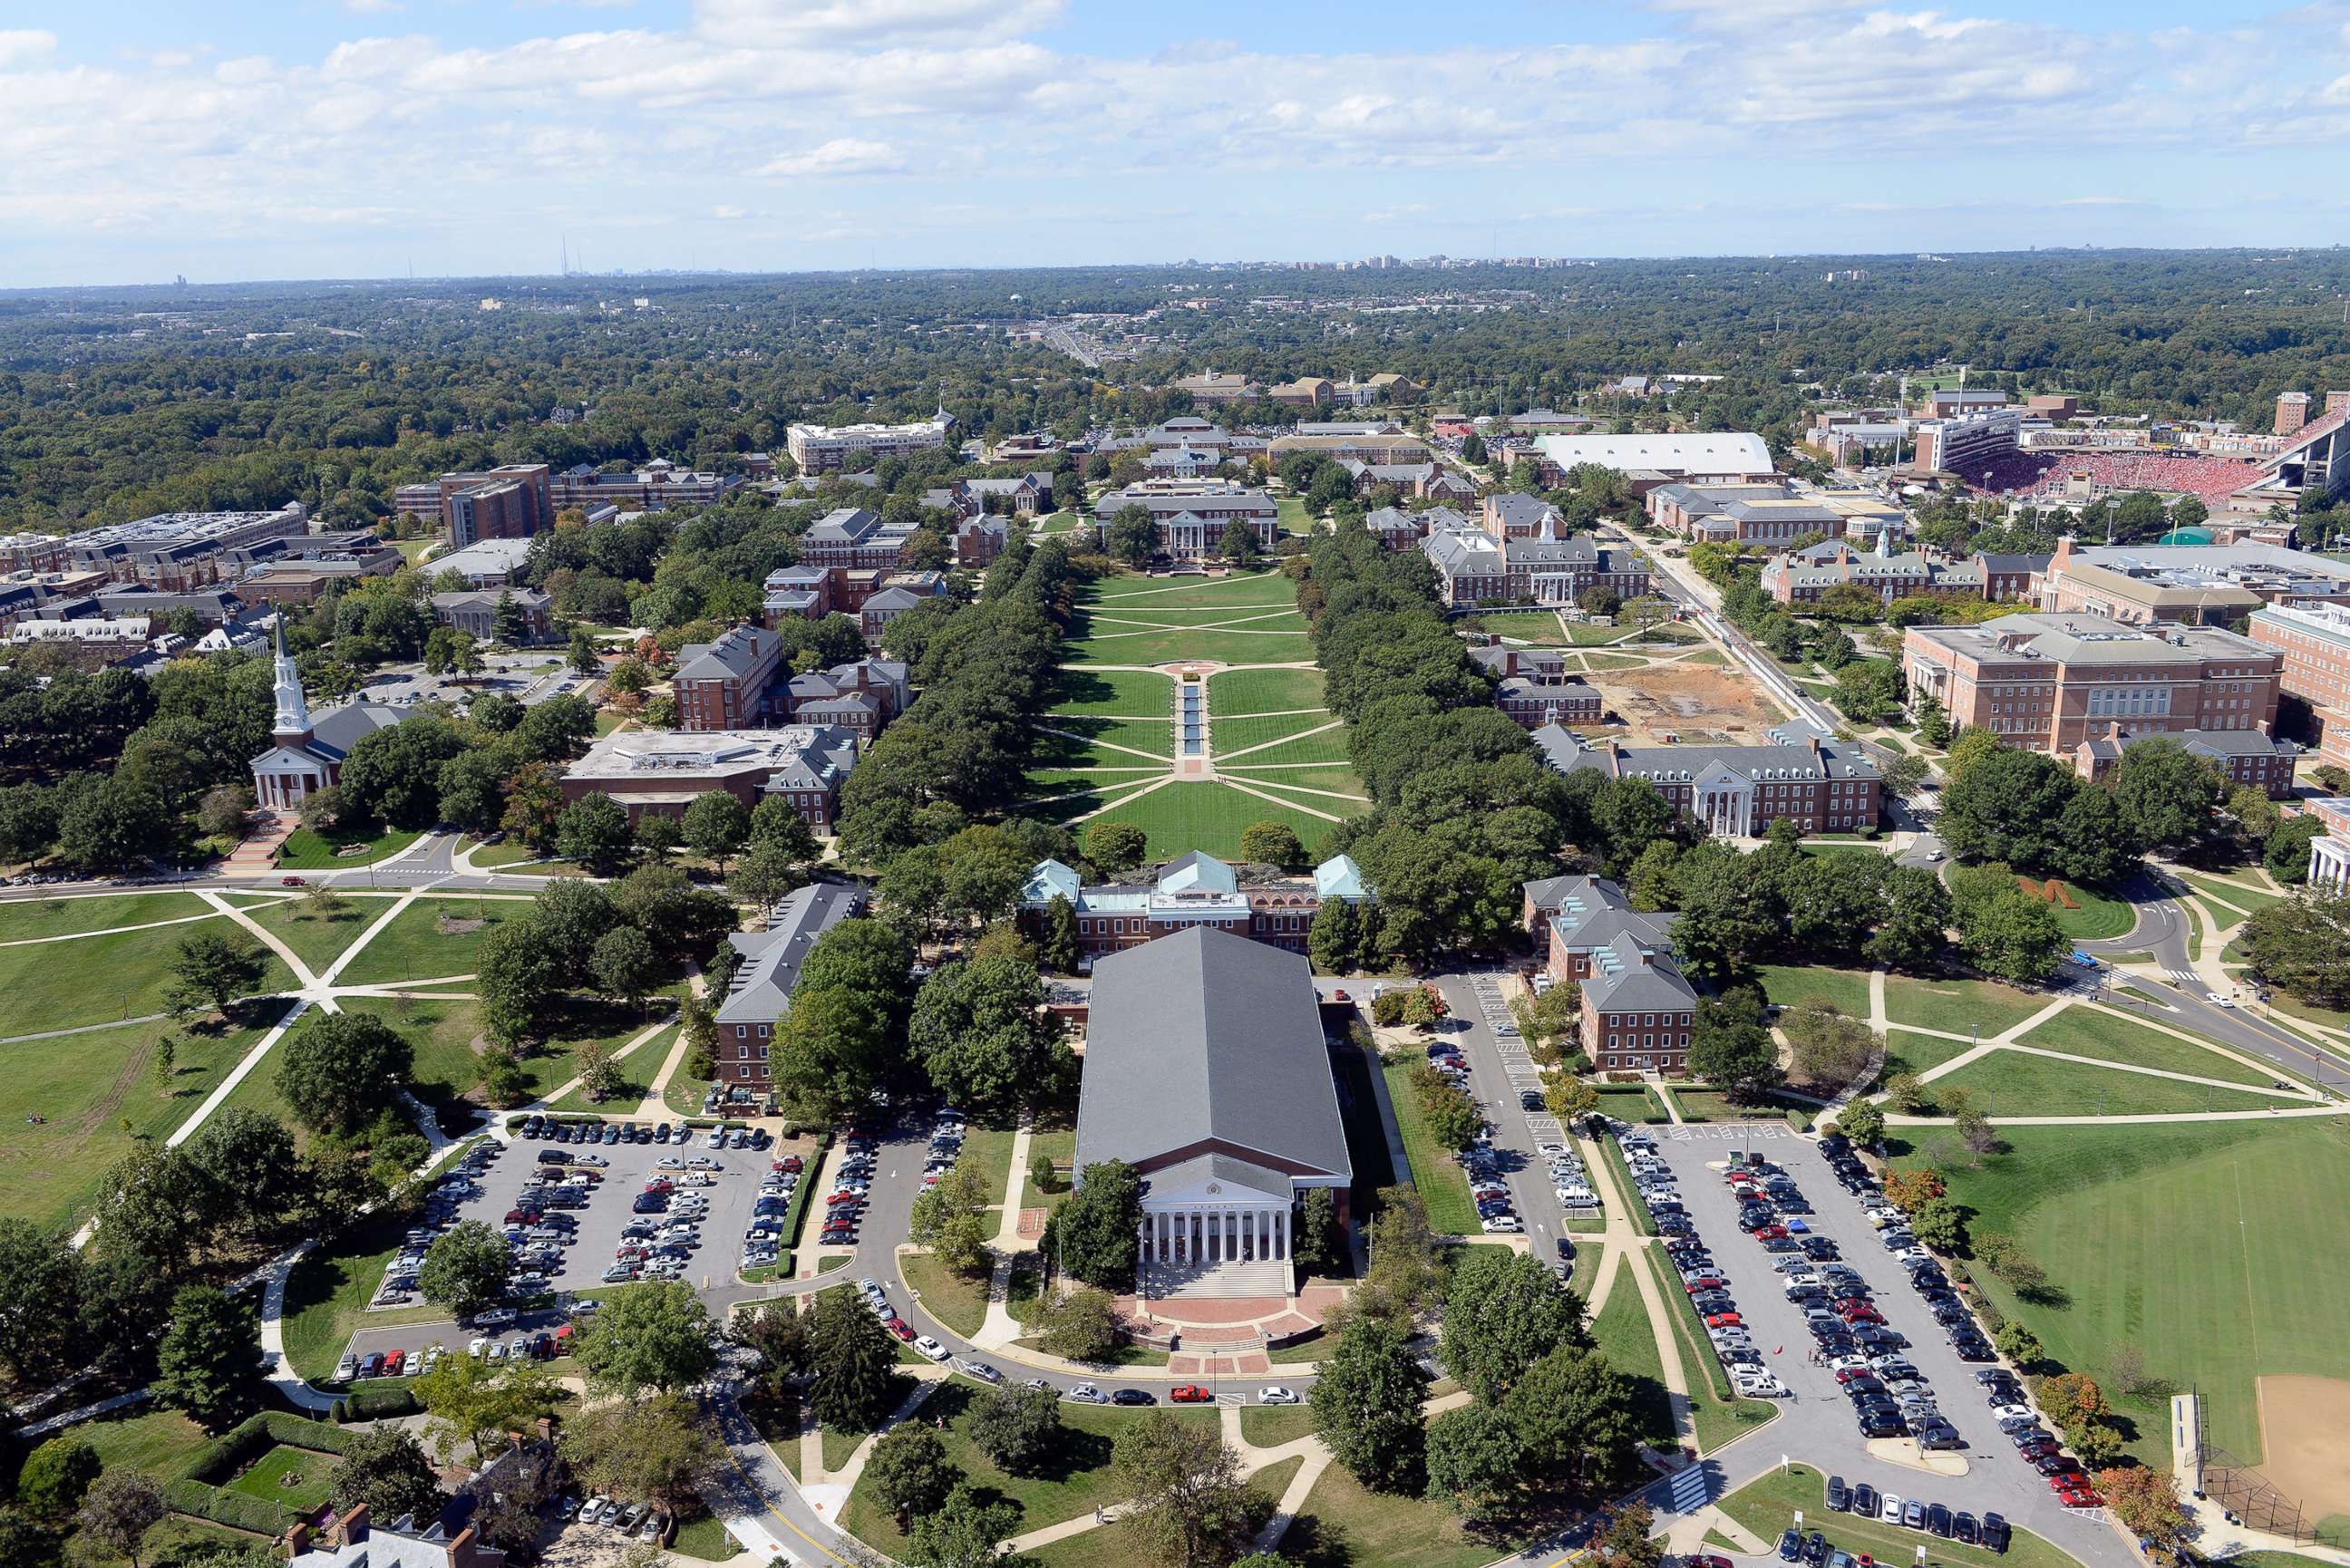 PHOTO: In this file photo is an aerial view of the University of Maryland campus taken on Oct. 4, 2014, in College Park, Md.